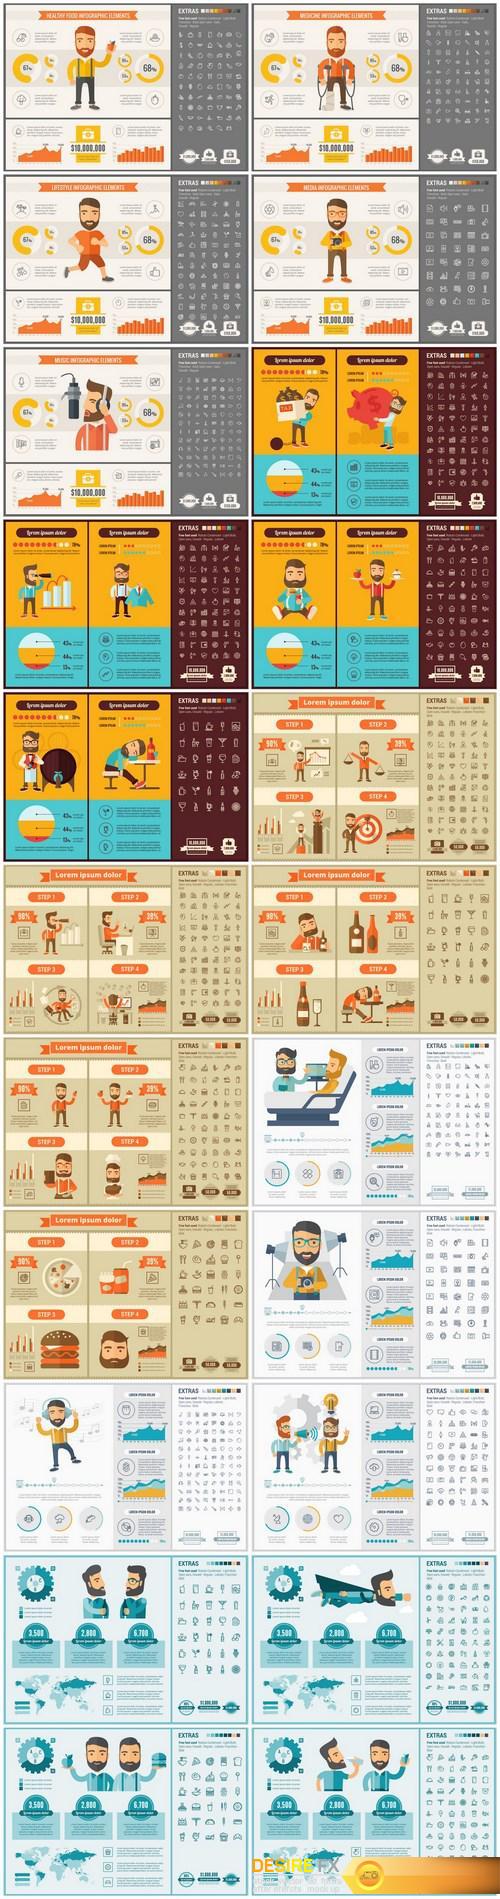 Flat Design Infographic Template - 24xEPS